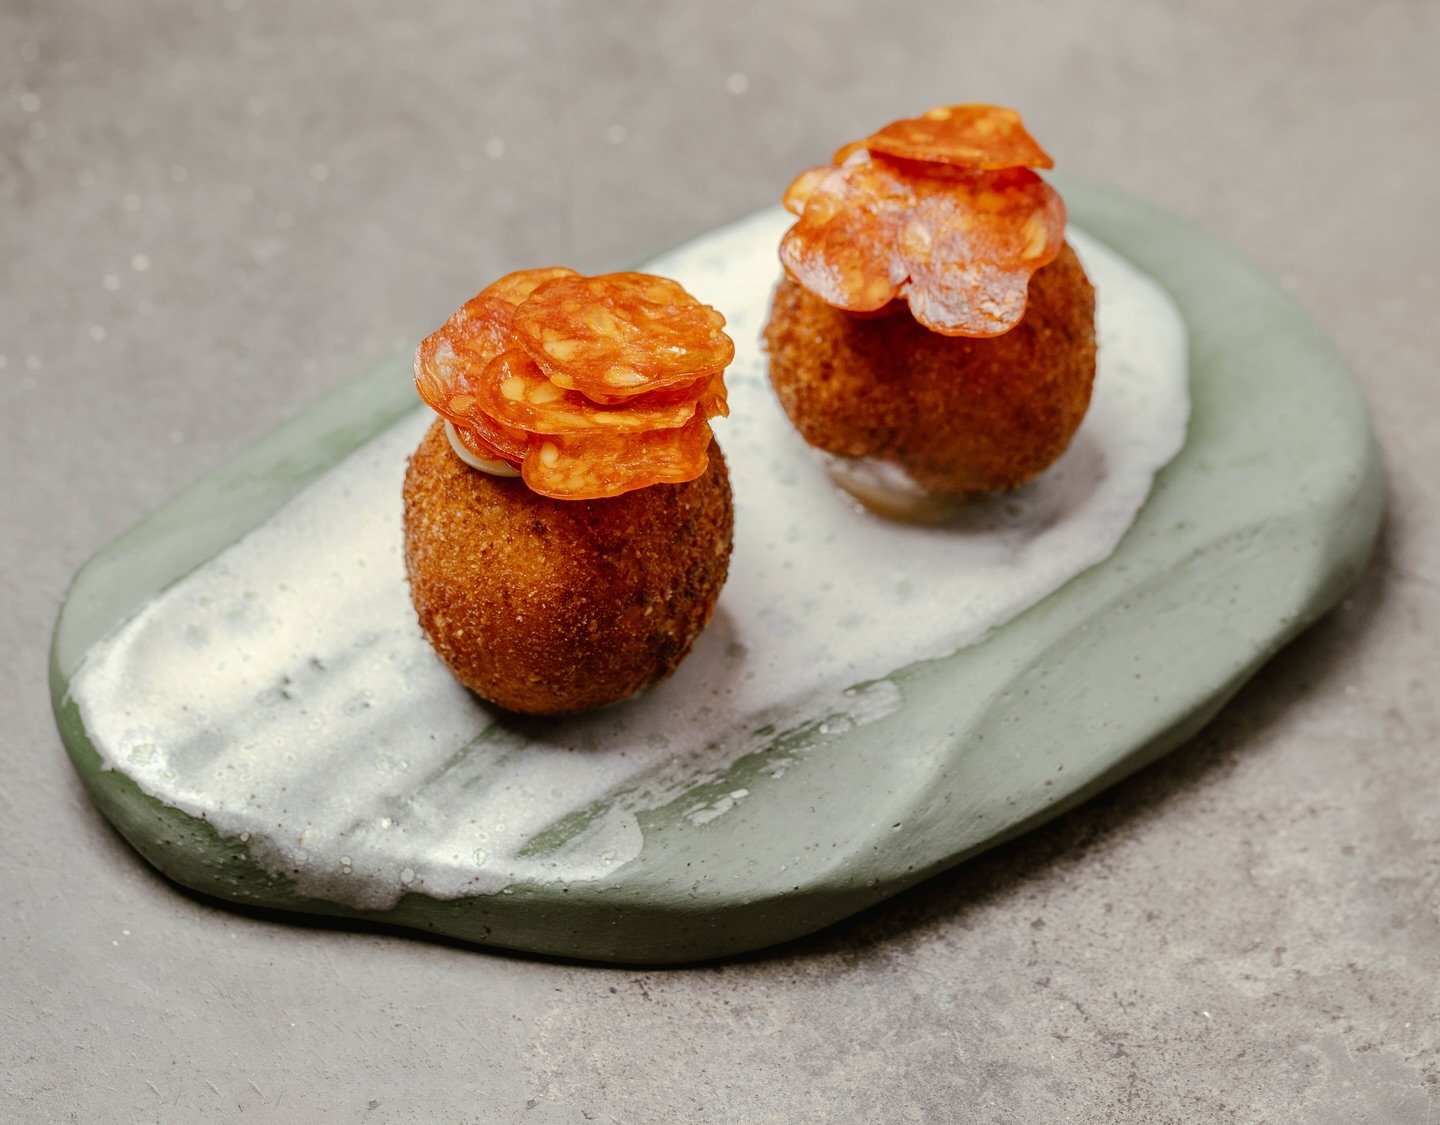 Made with Idiazabal cheese and topped with Txorizo, both hailing from Navarra, every bite is a harmonious explosion of Basque flavours. The smoky notes of the cheese complement the spicy kick of the Txorizo de Arbizu &mdash;a cured, lean pork seasone